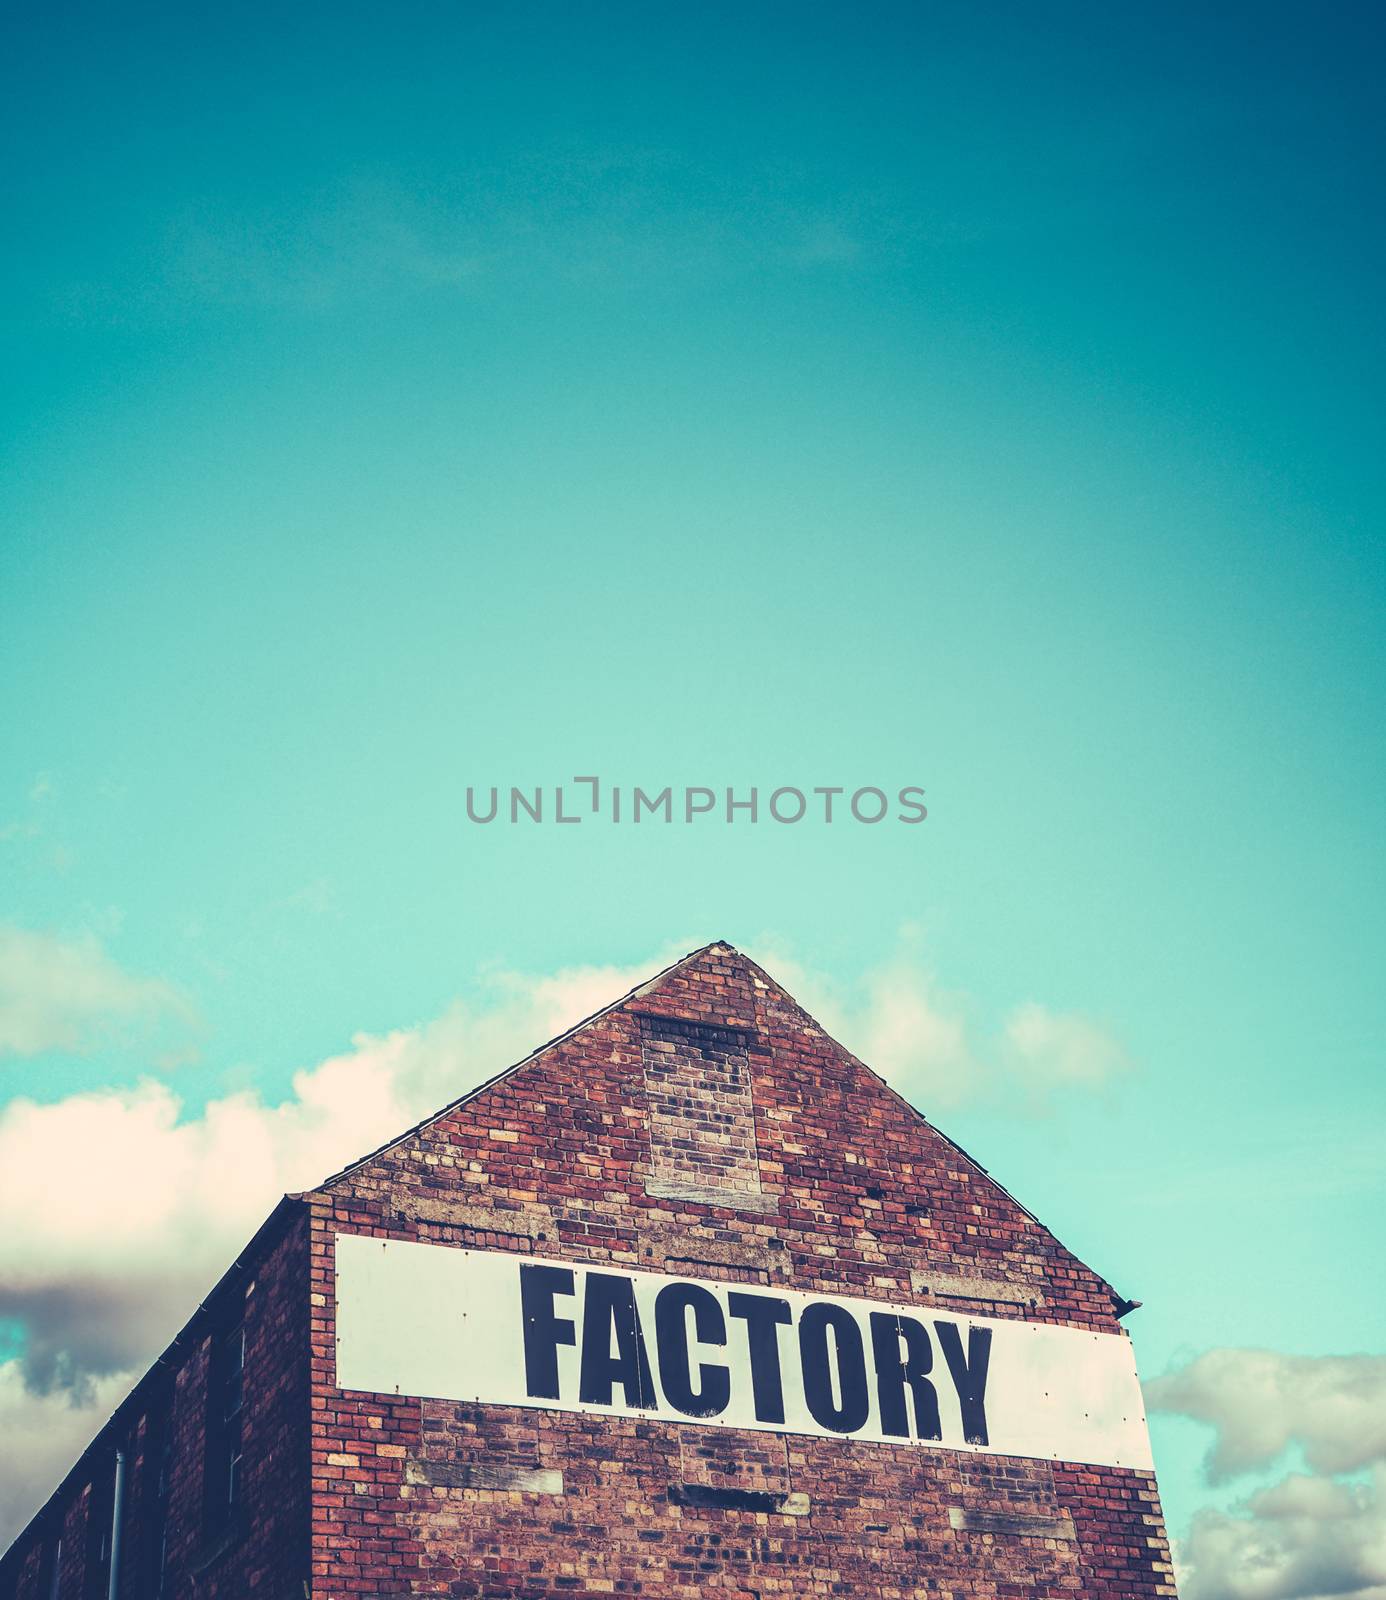 Urban Industrial Red Brick Factory Building With Blue Sky And Copy Space